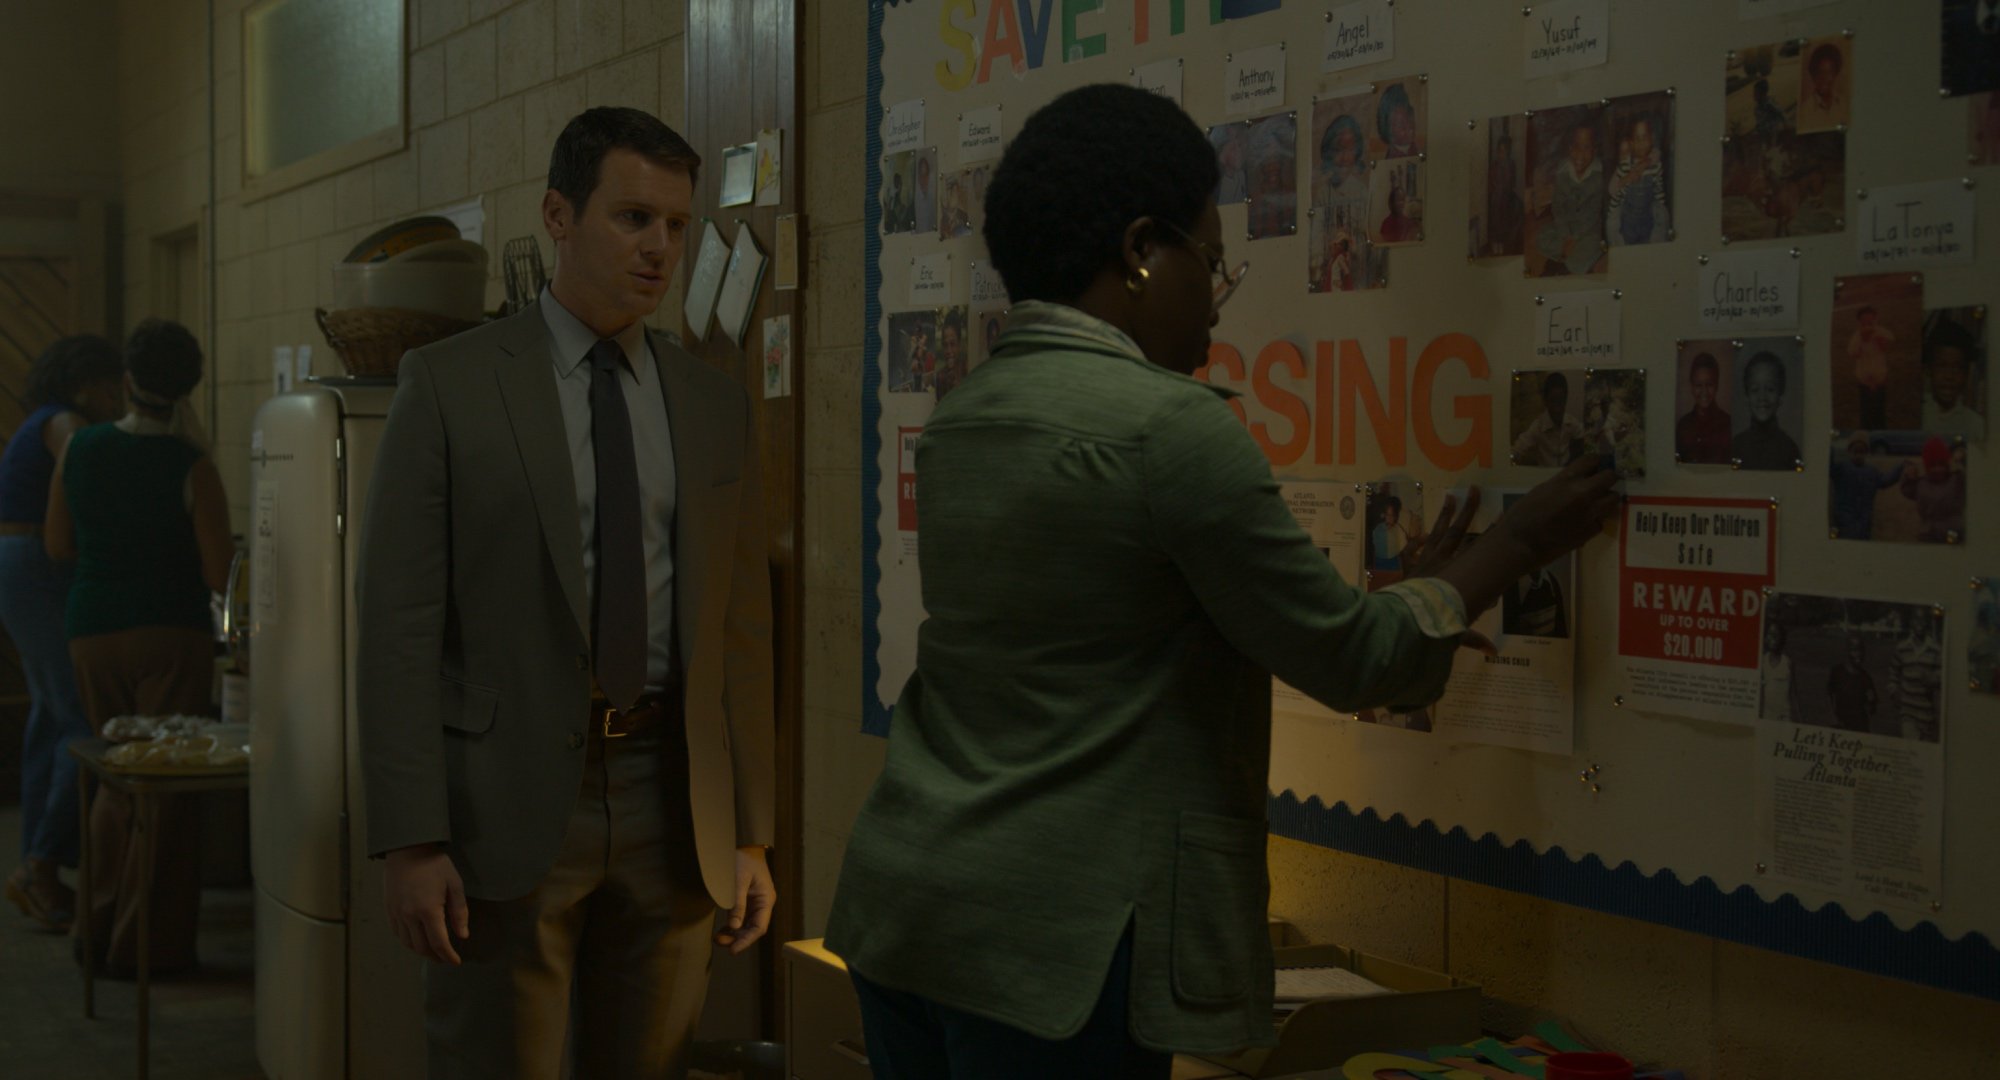 Jonathan Groff and June Carryl during the Atlanta murders case in 'Mindhunter' Season 2.